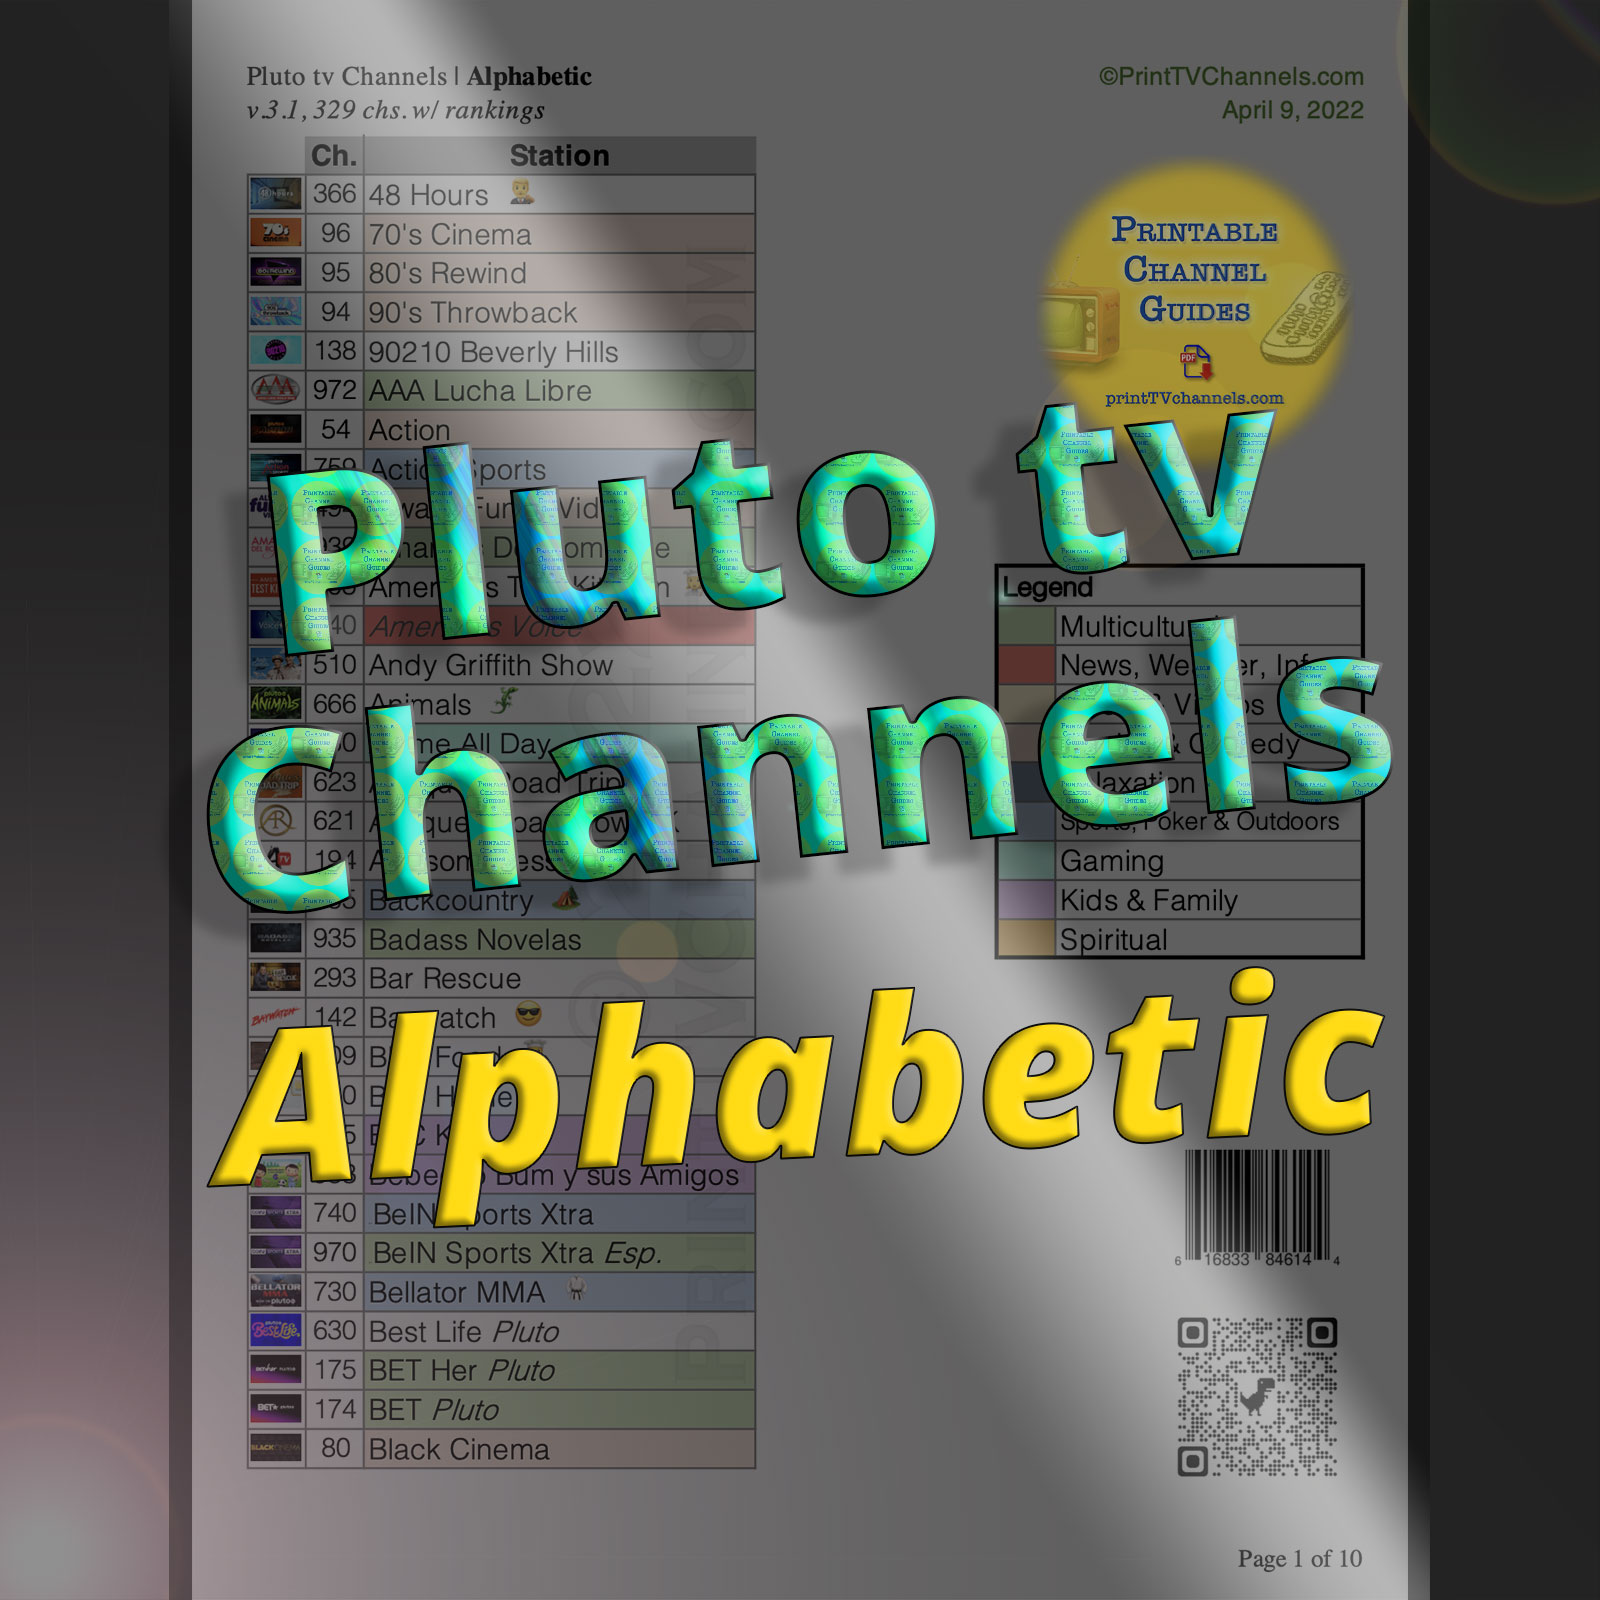 Pluto TV Channel Guide Lineup | Alphabetic (v.3.1, April 2022) — Full Pluto channel lineup in a free, large-print channel guide. Pluto TV stations are organized alphabetically in this PDF. See all Pluto TV channels at once! Primary preview image of the PDF.